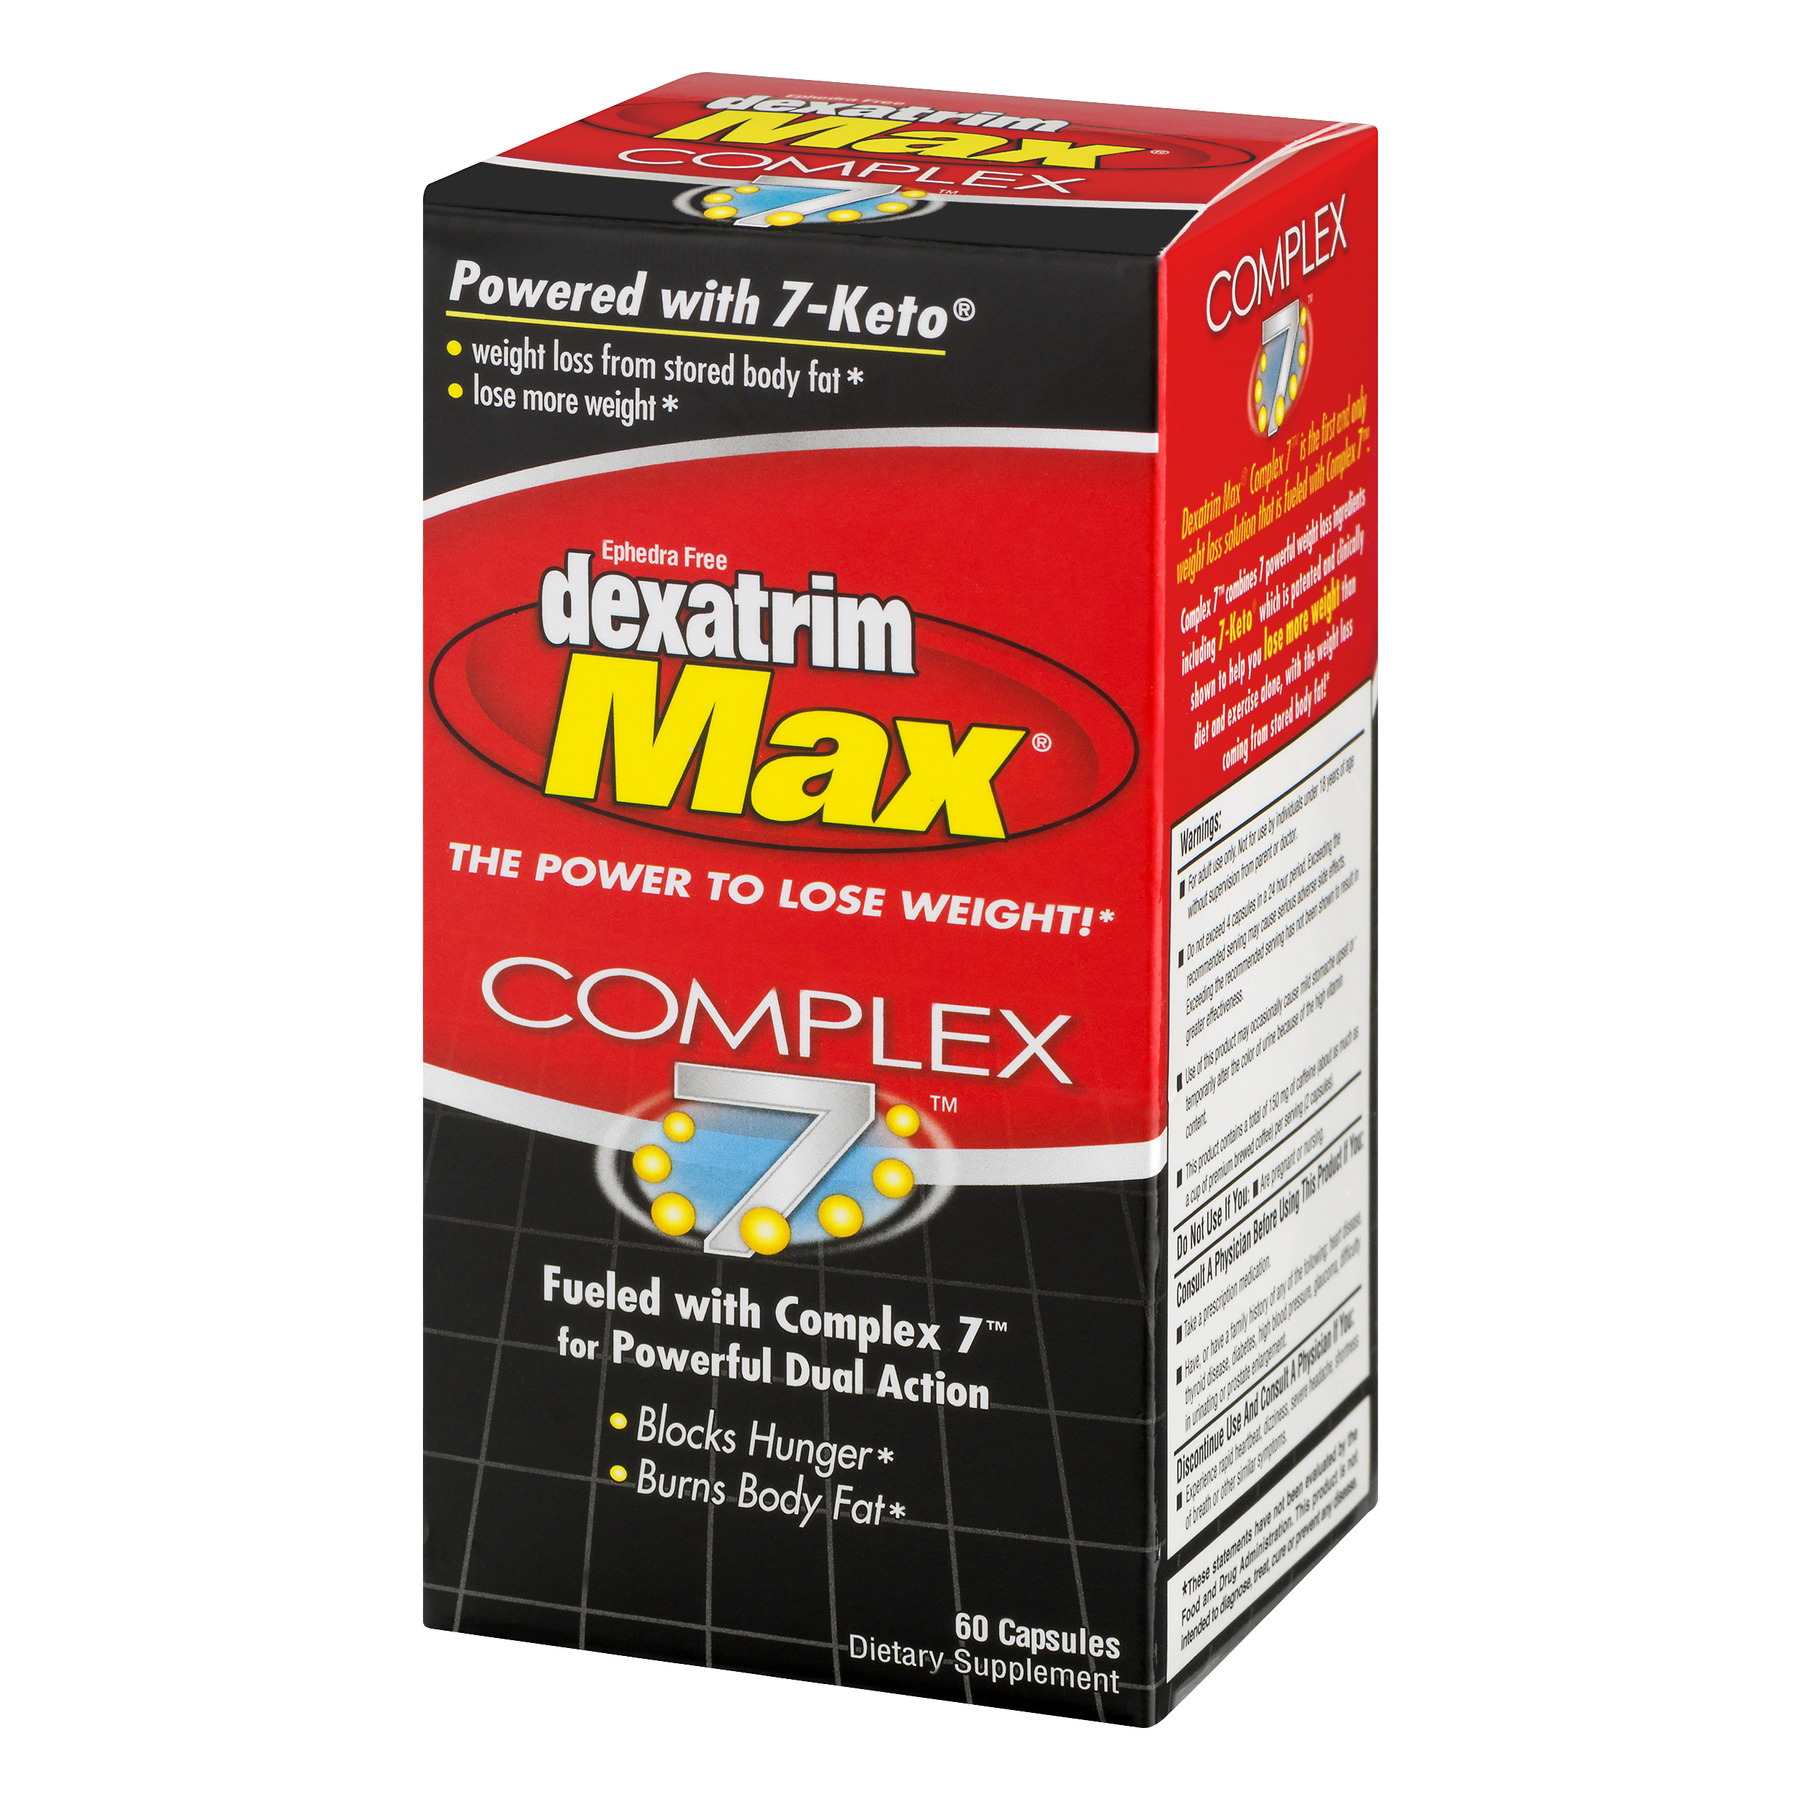 Dexatrim Max Complex Appetite Suppressant Weight Loss Dietary Supplement, Ctules, 60 Ct - image 1 of 7